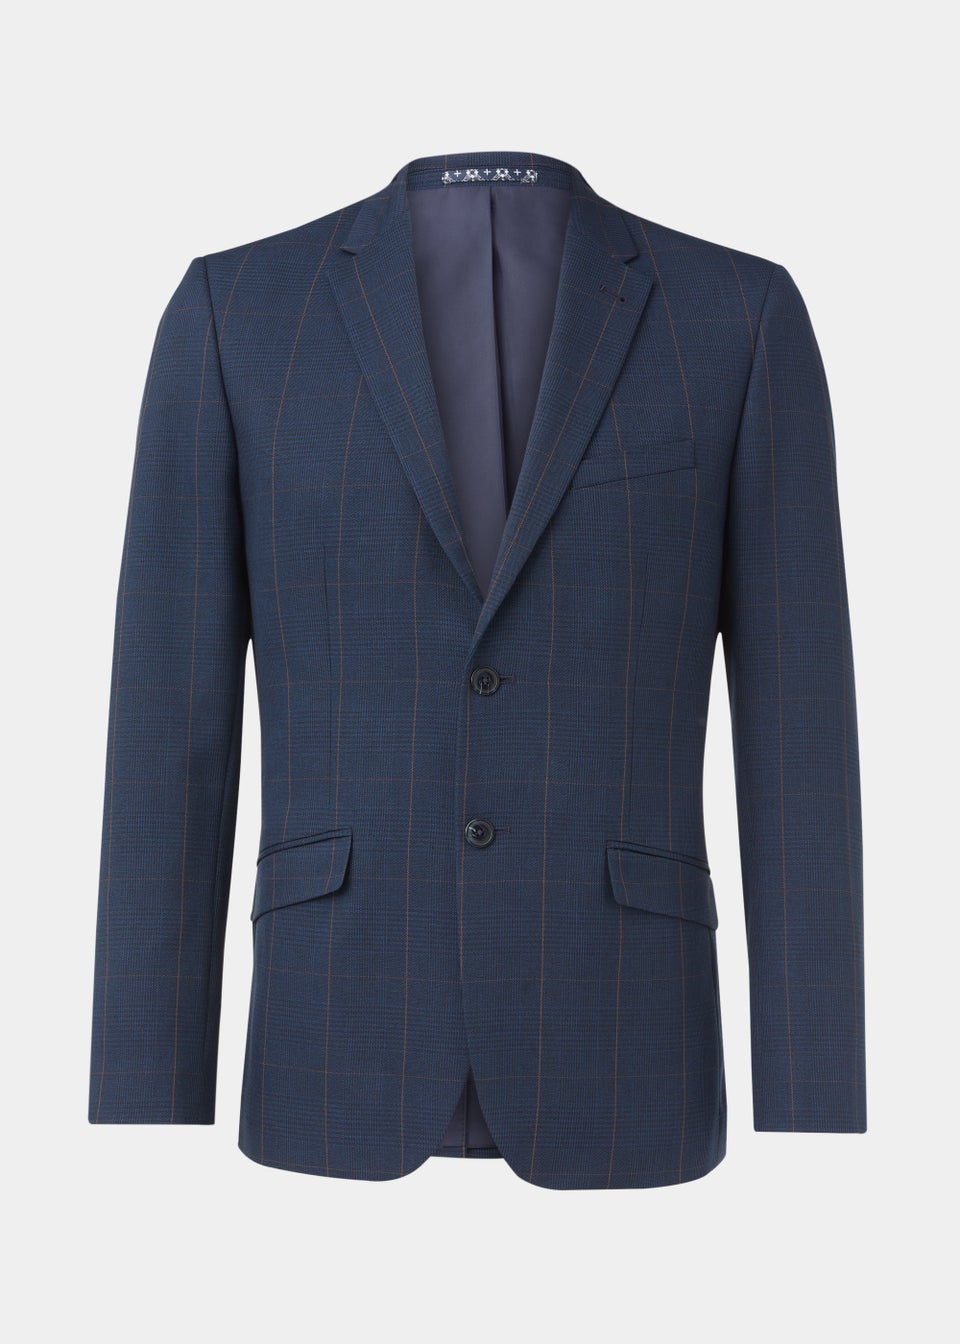 Taylor & Wright Westminster Navy Slim Fit Suit Jacket